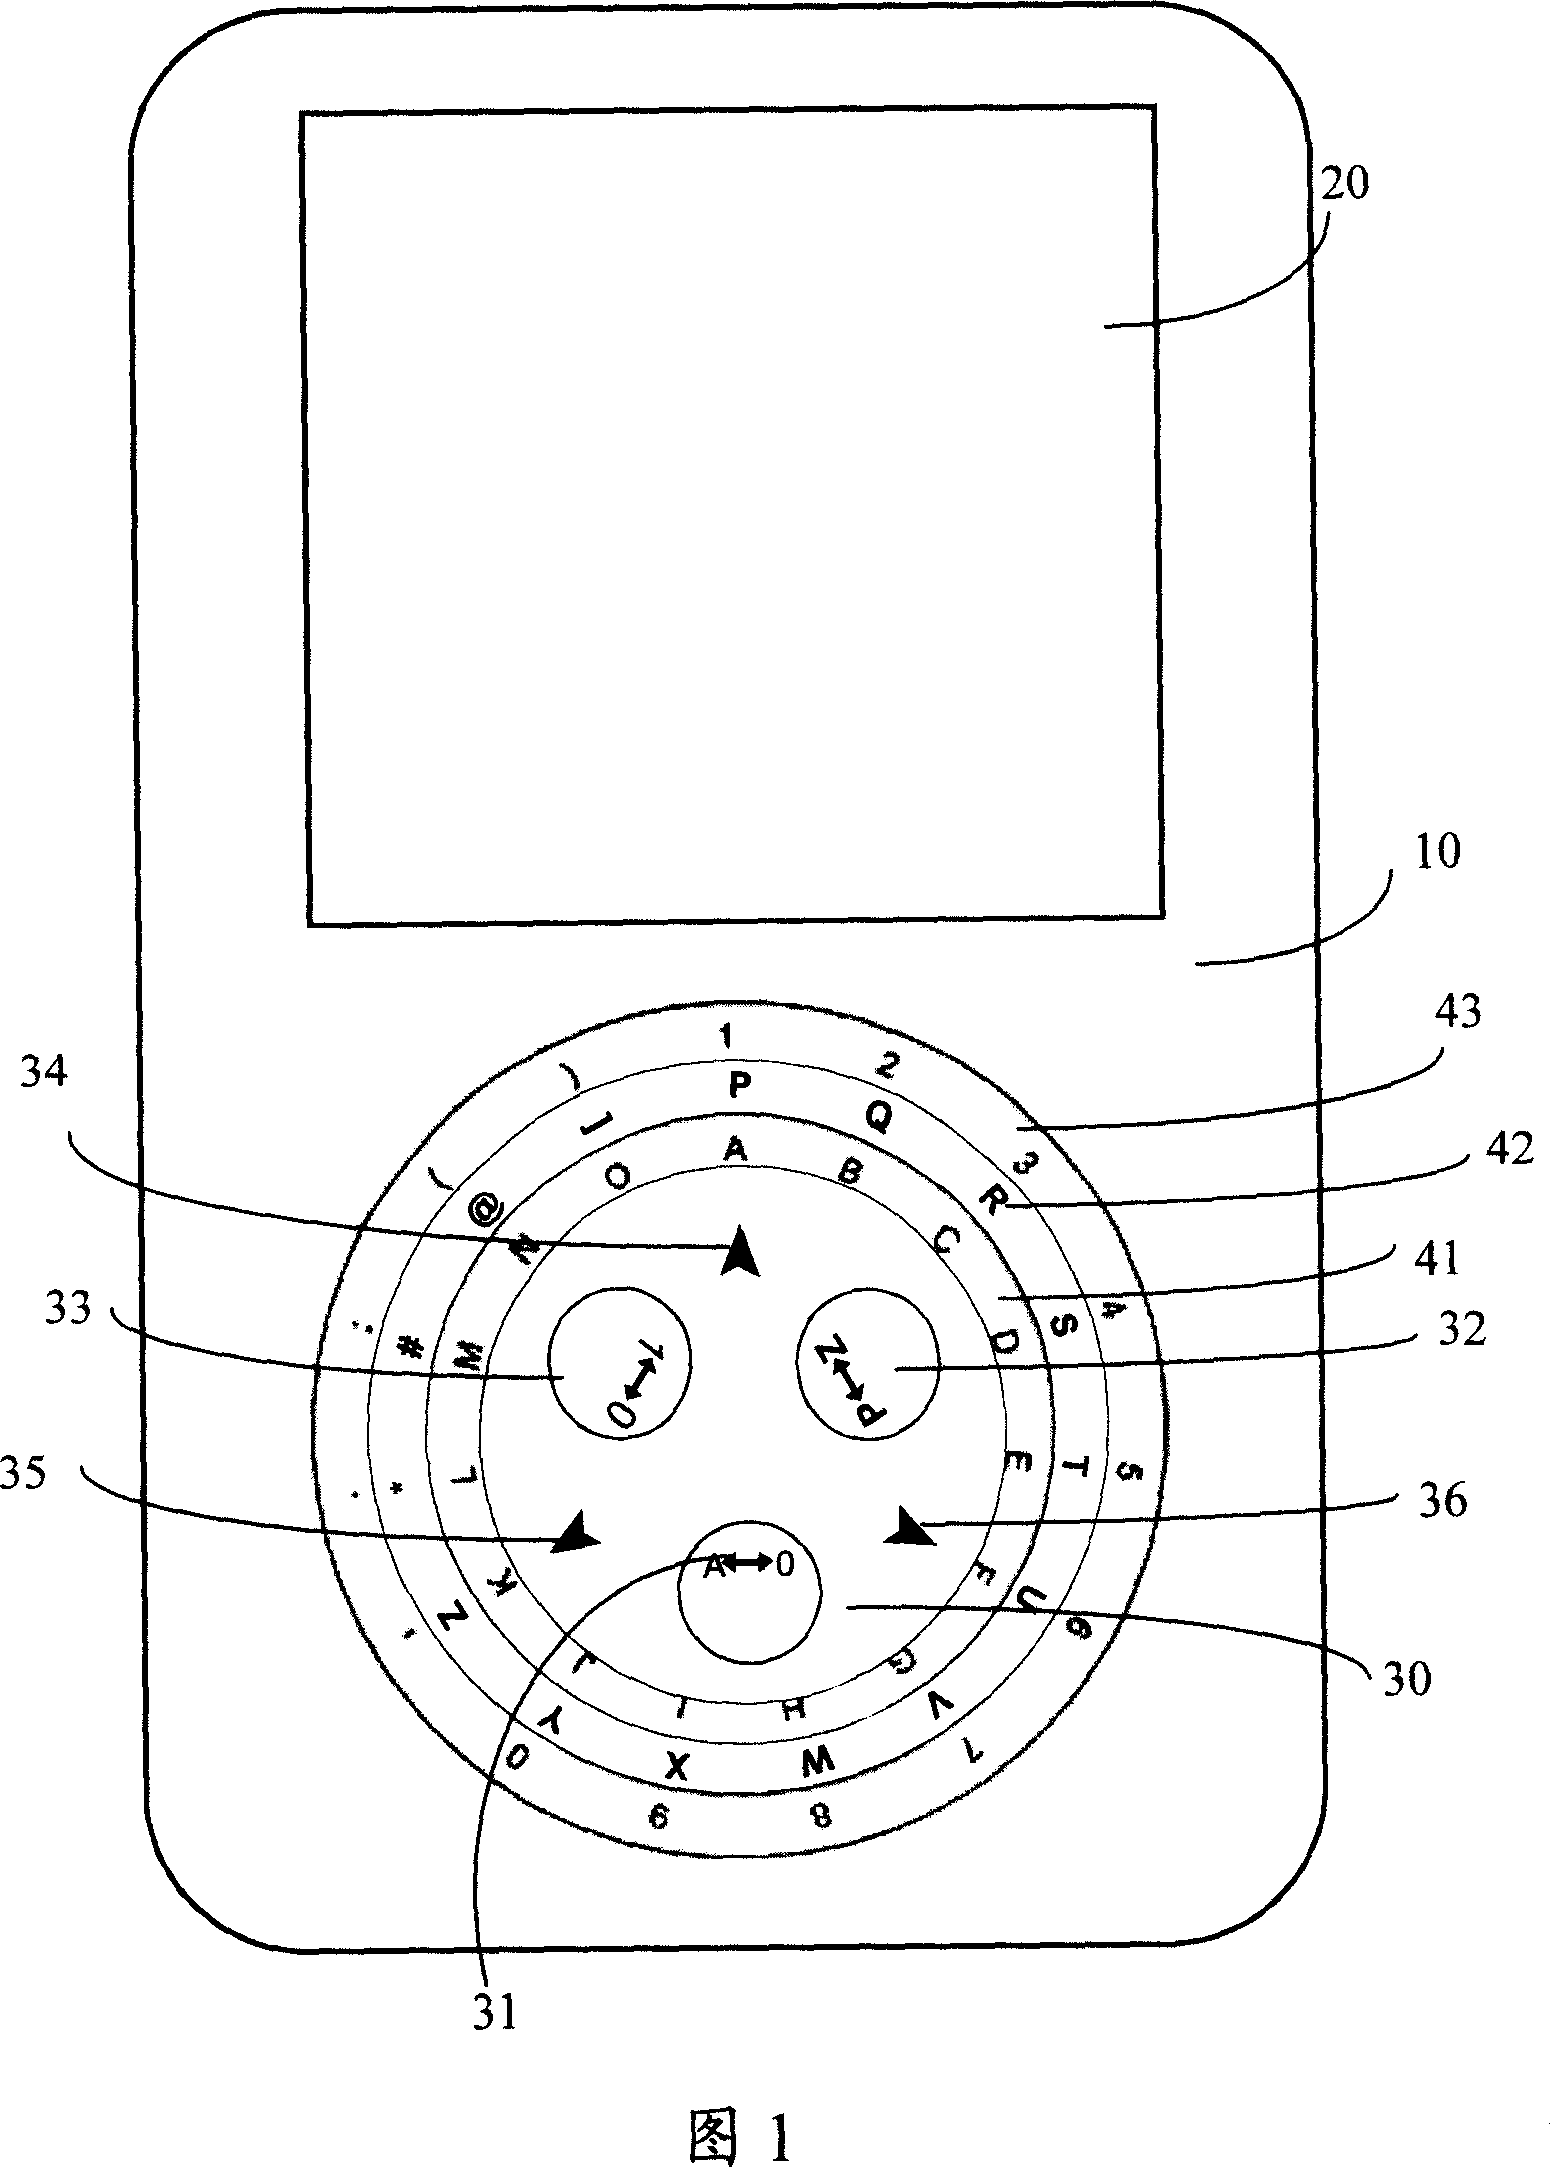 Electronic installation with character input fly shuttle